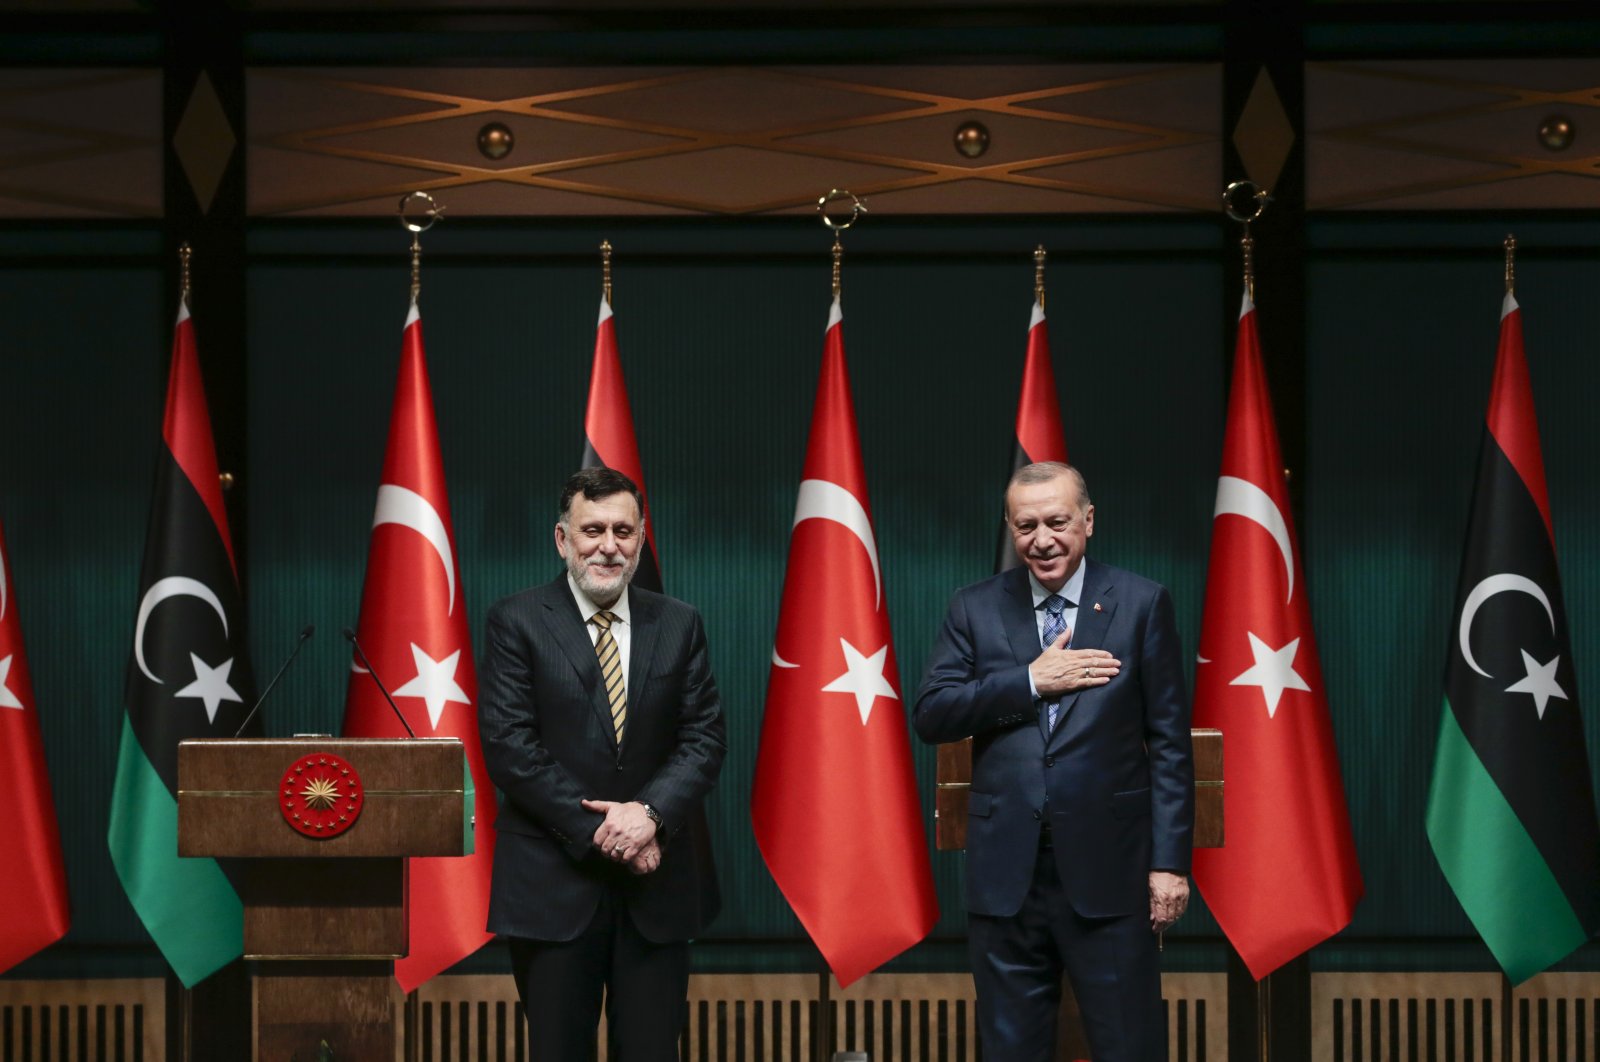 President Recep Tayyip Erdoğan and Libya's Prime Minister Fayez al-Sarraj during a press conference after their meeting on the Libya crisis and bilateral relations, Ankara, June 4, 2020. (AA Photo)